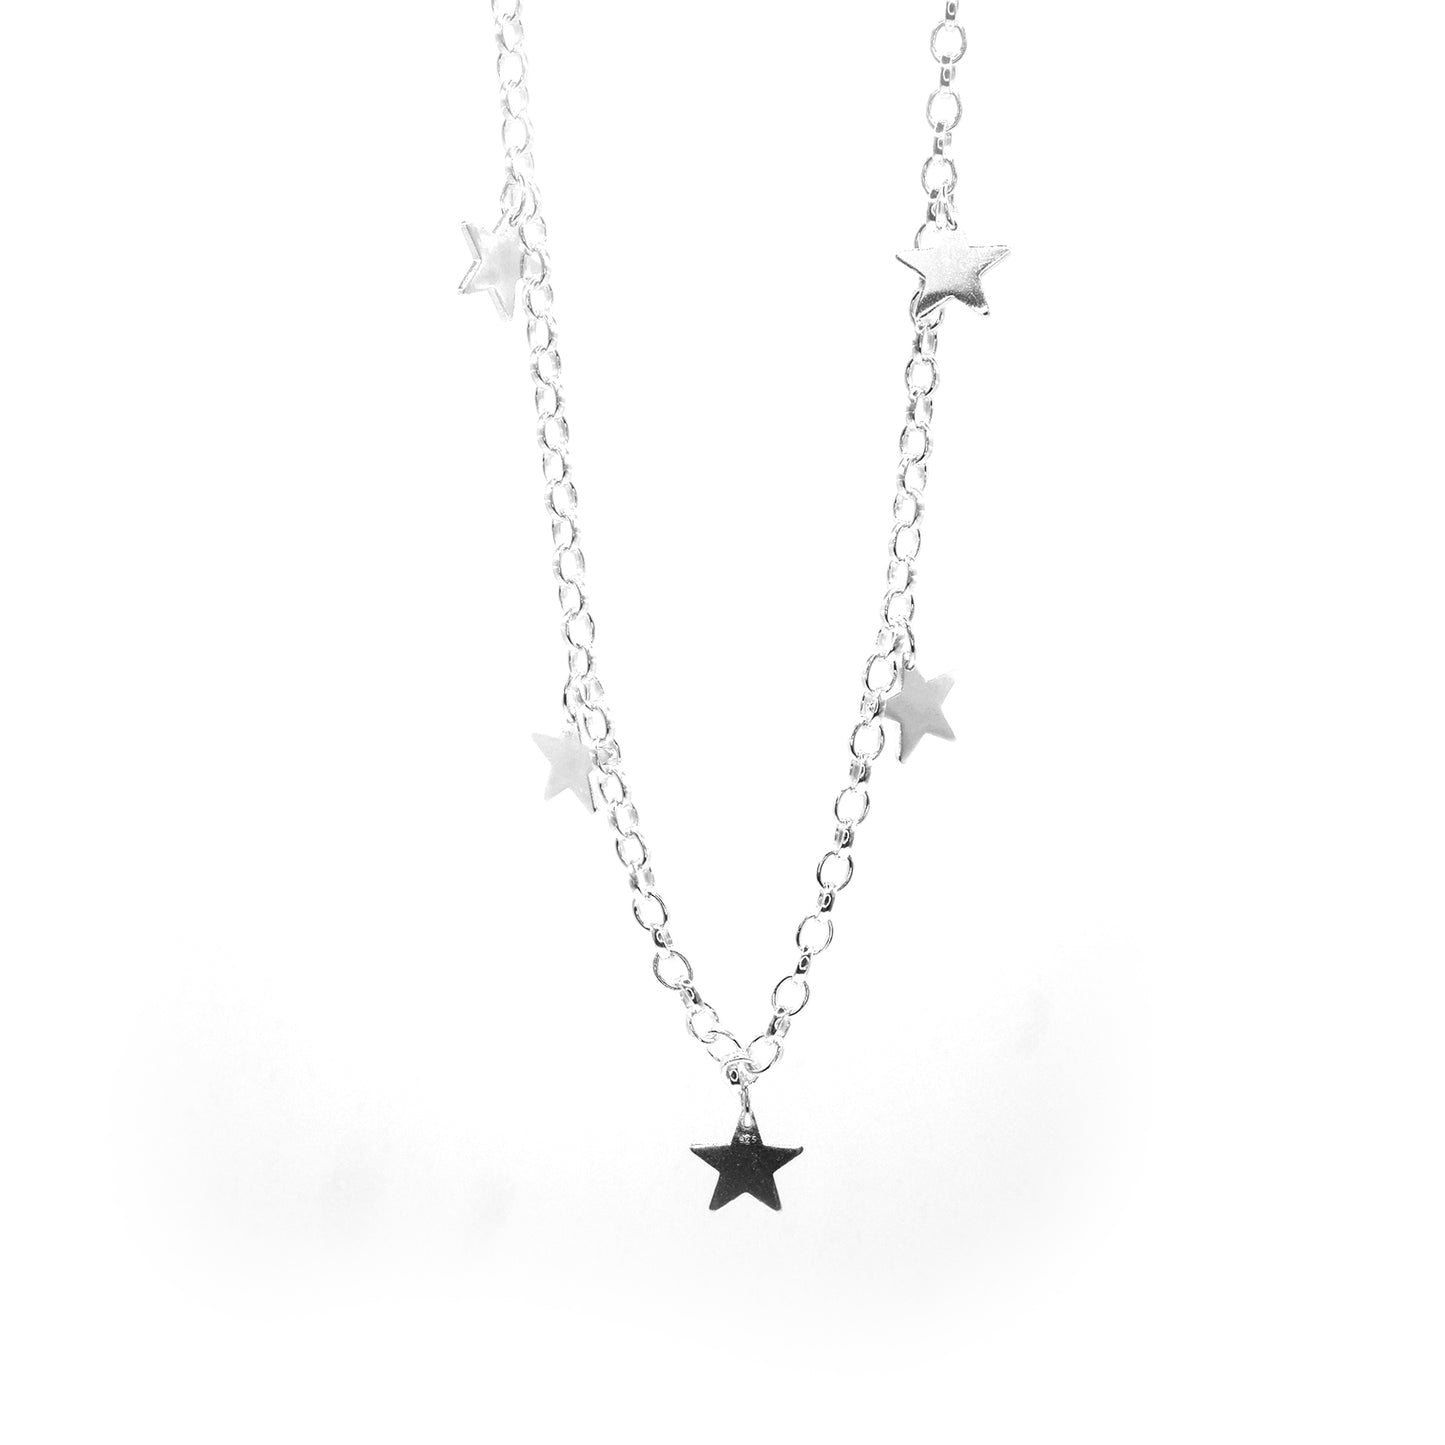 5 Star Necklace